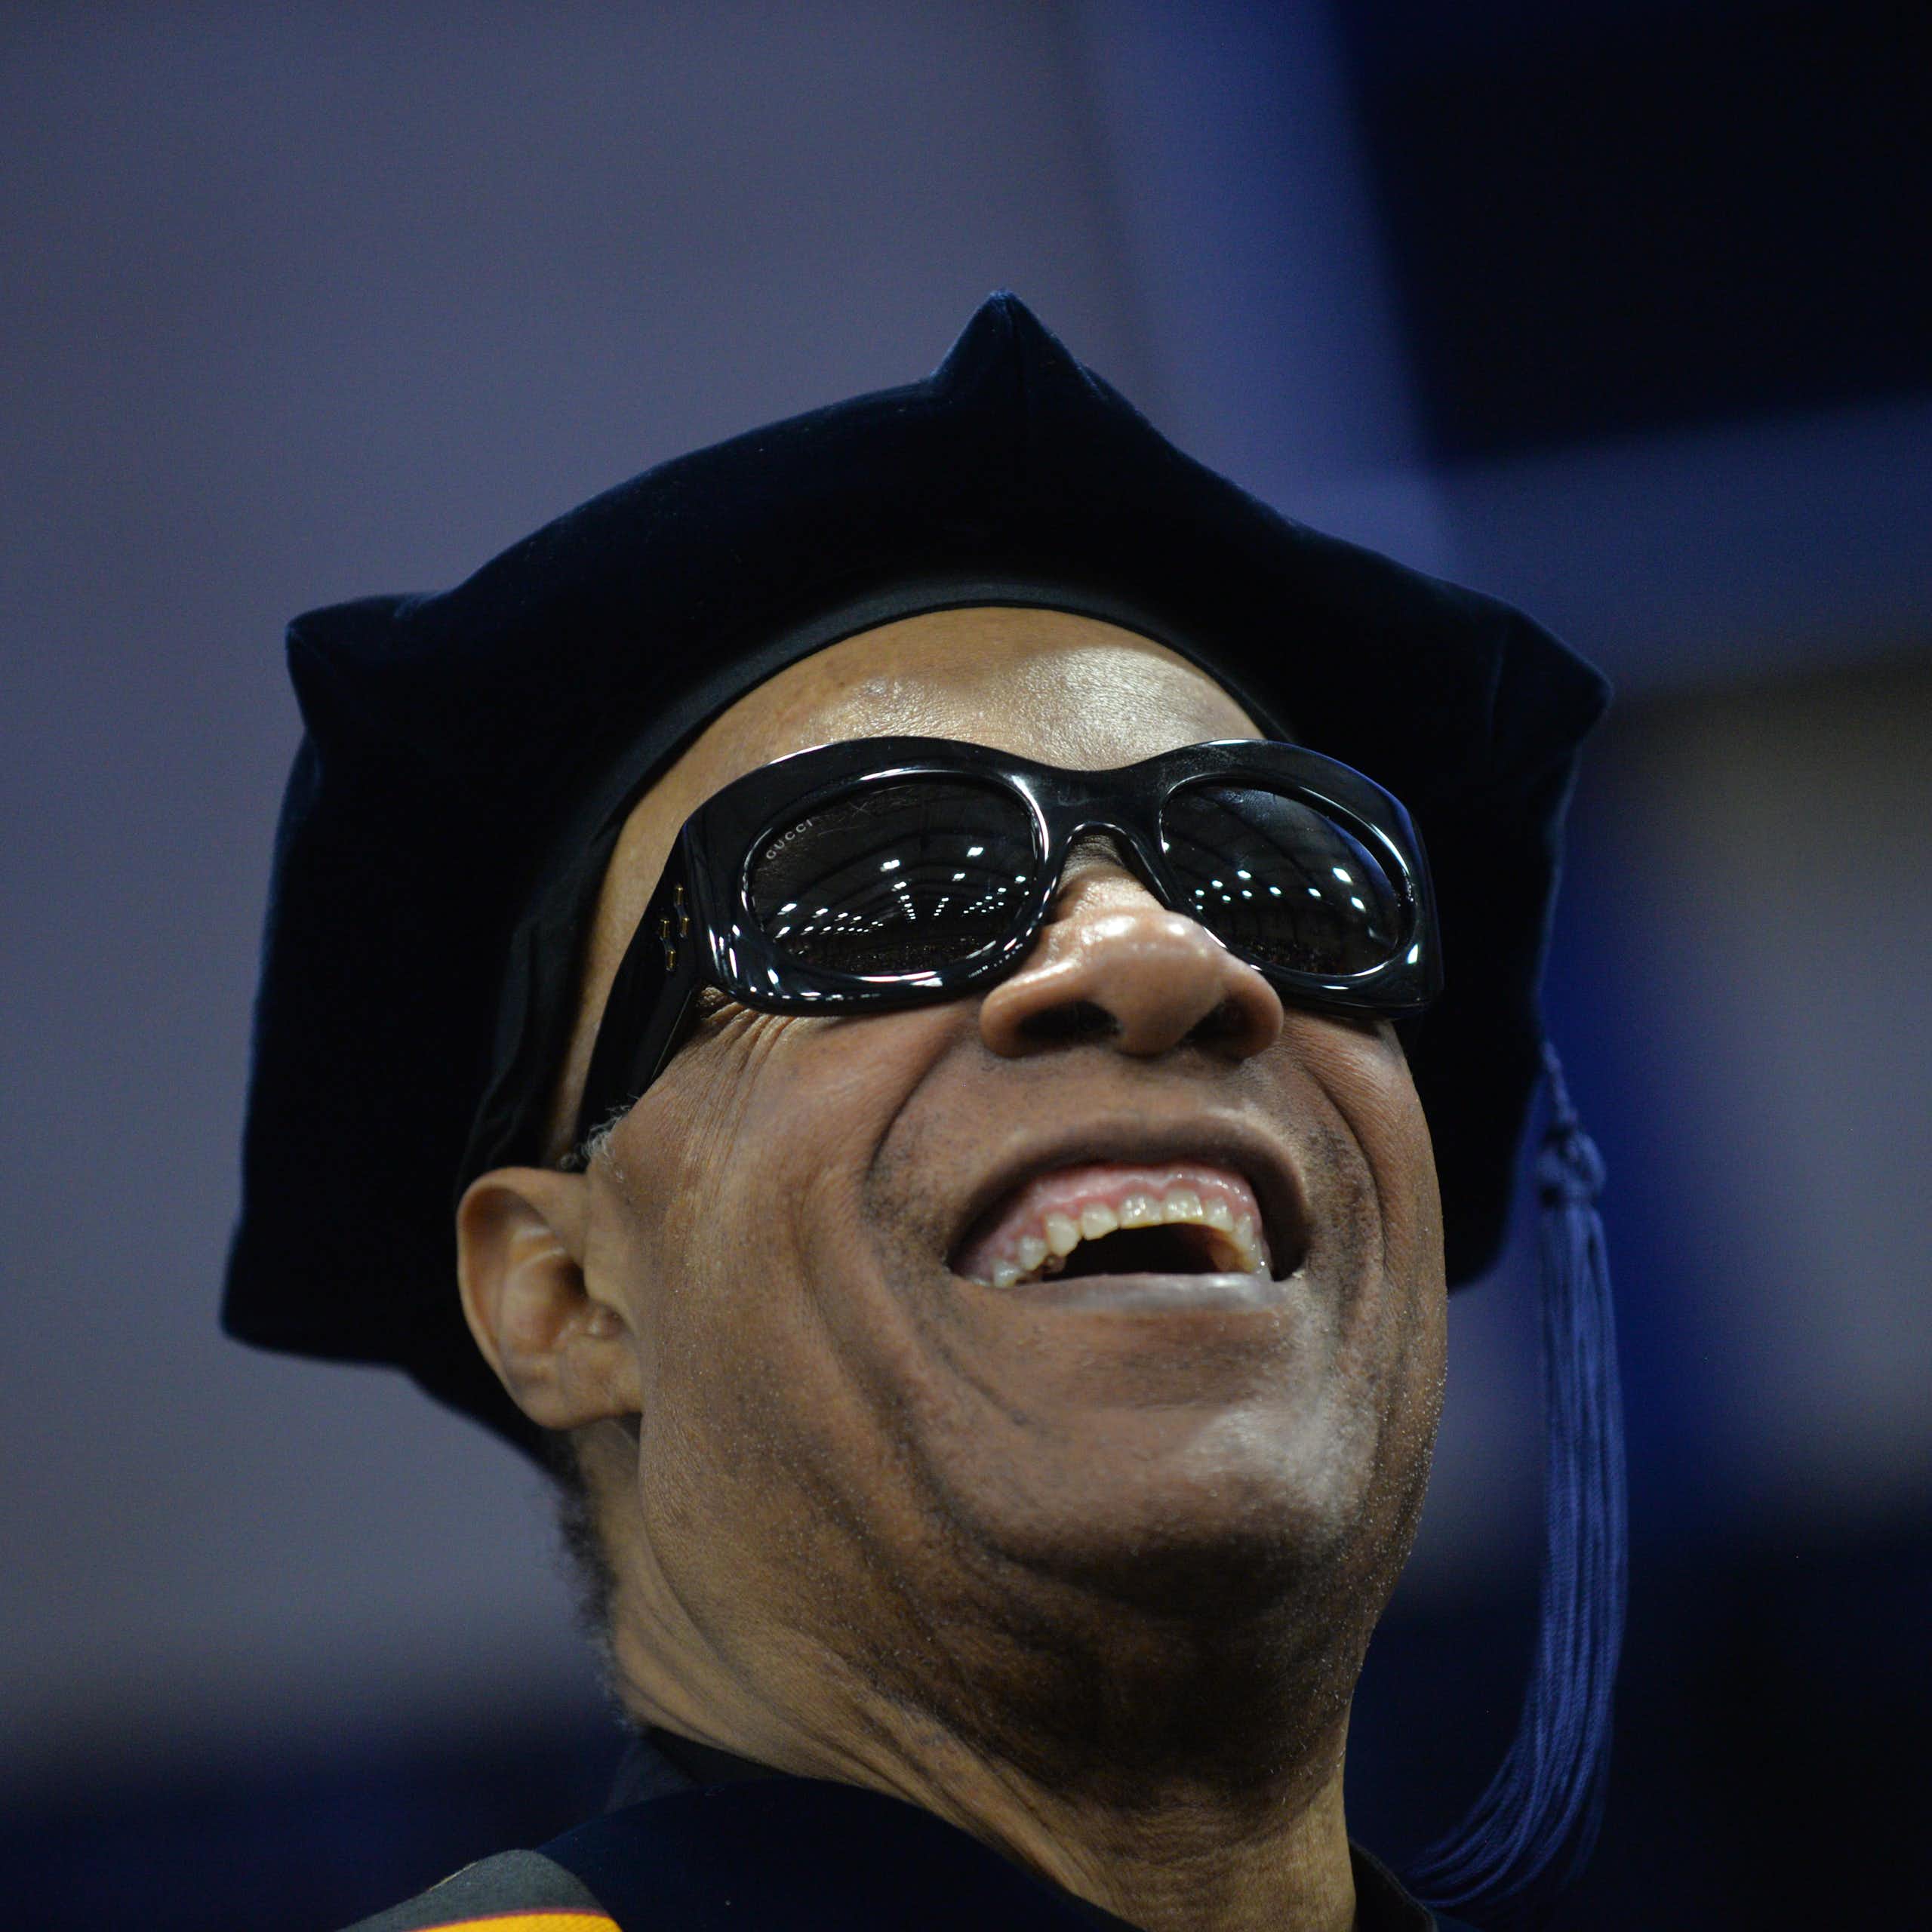 Smiling man wearing dark glasses and a black cap with a tassel